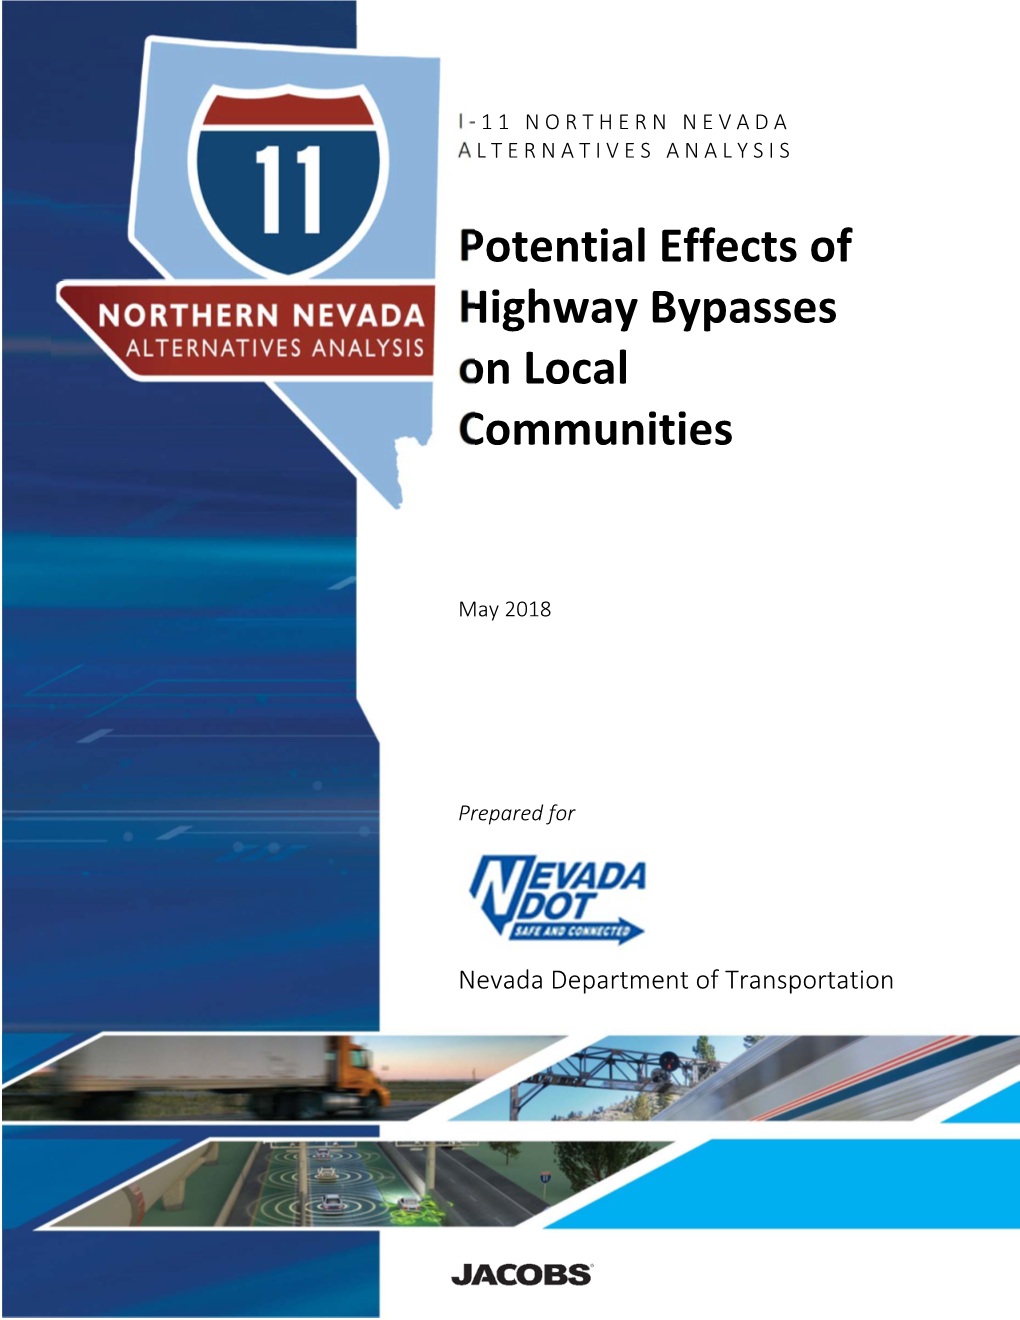 Potential Effects of Highway Bypasses on Local Communities